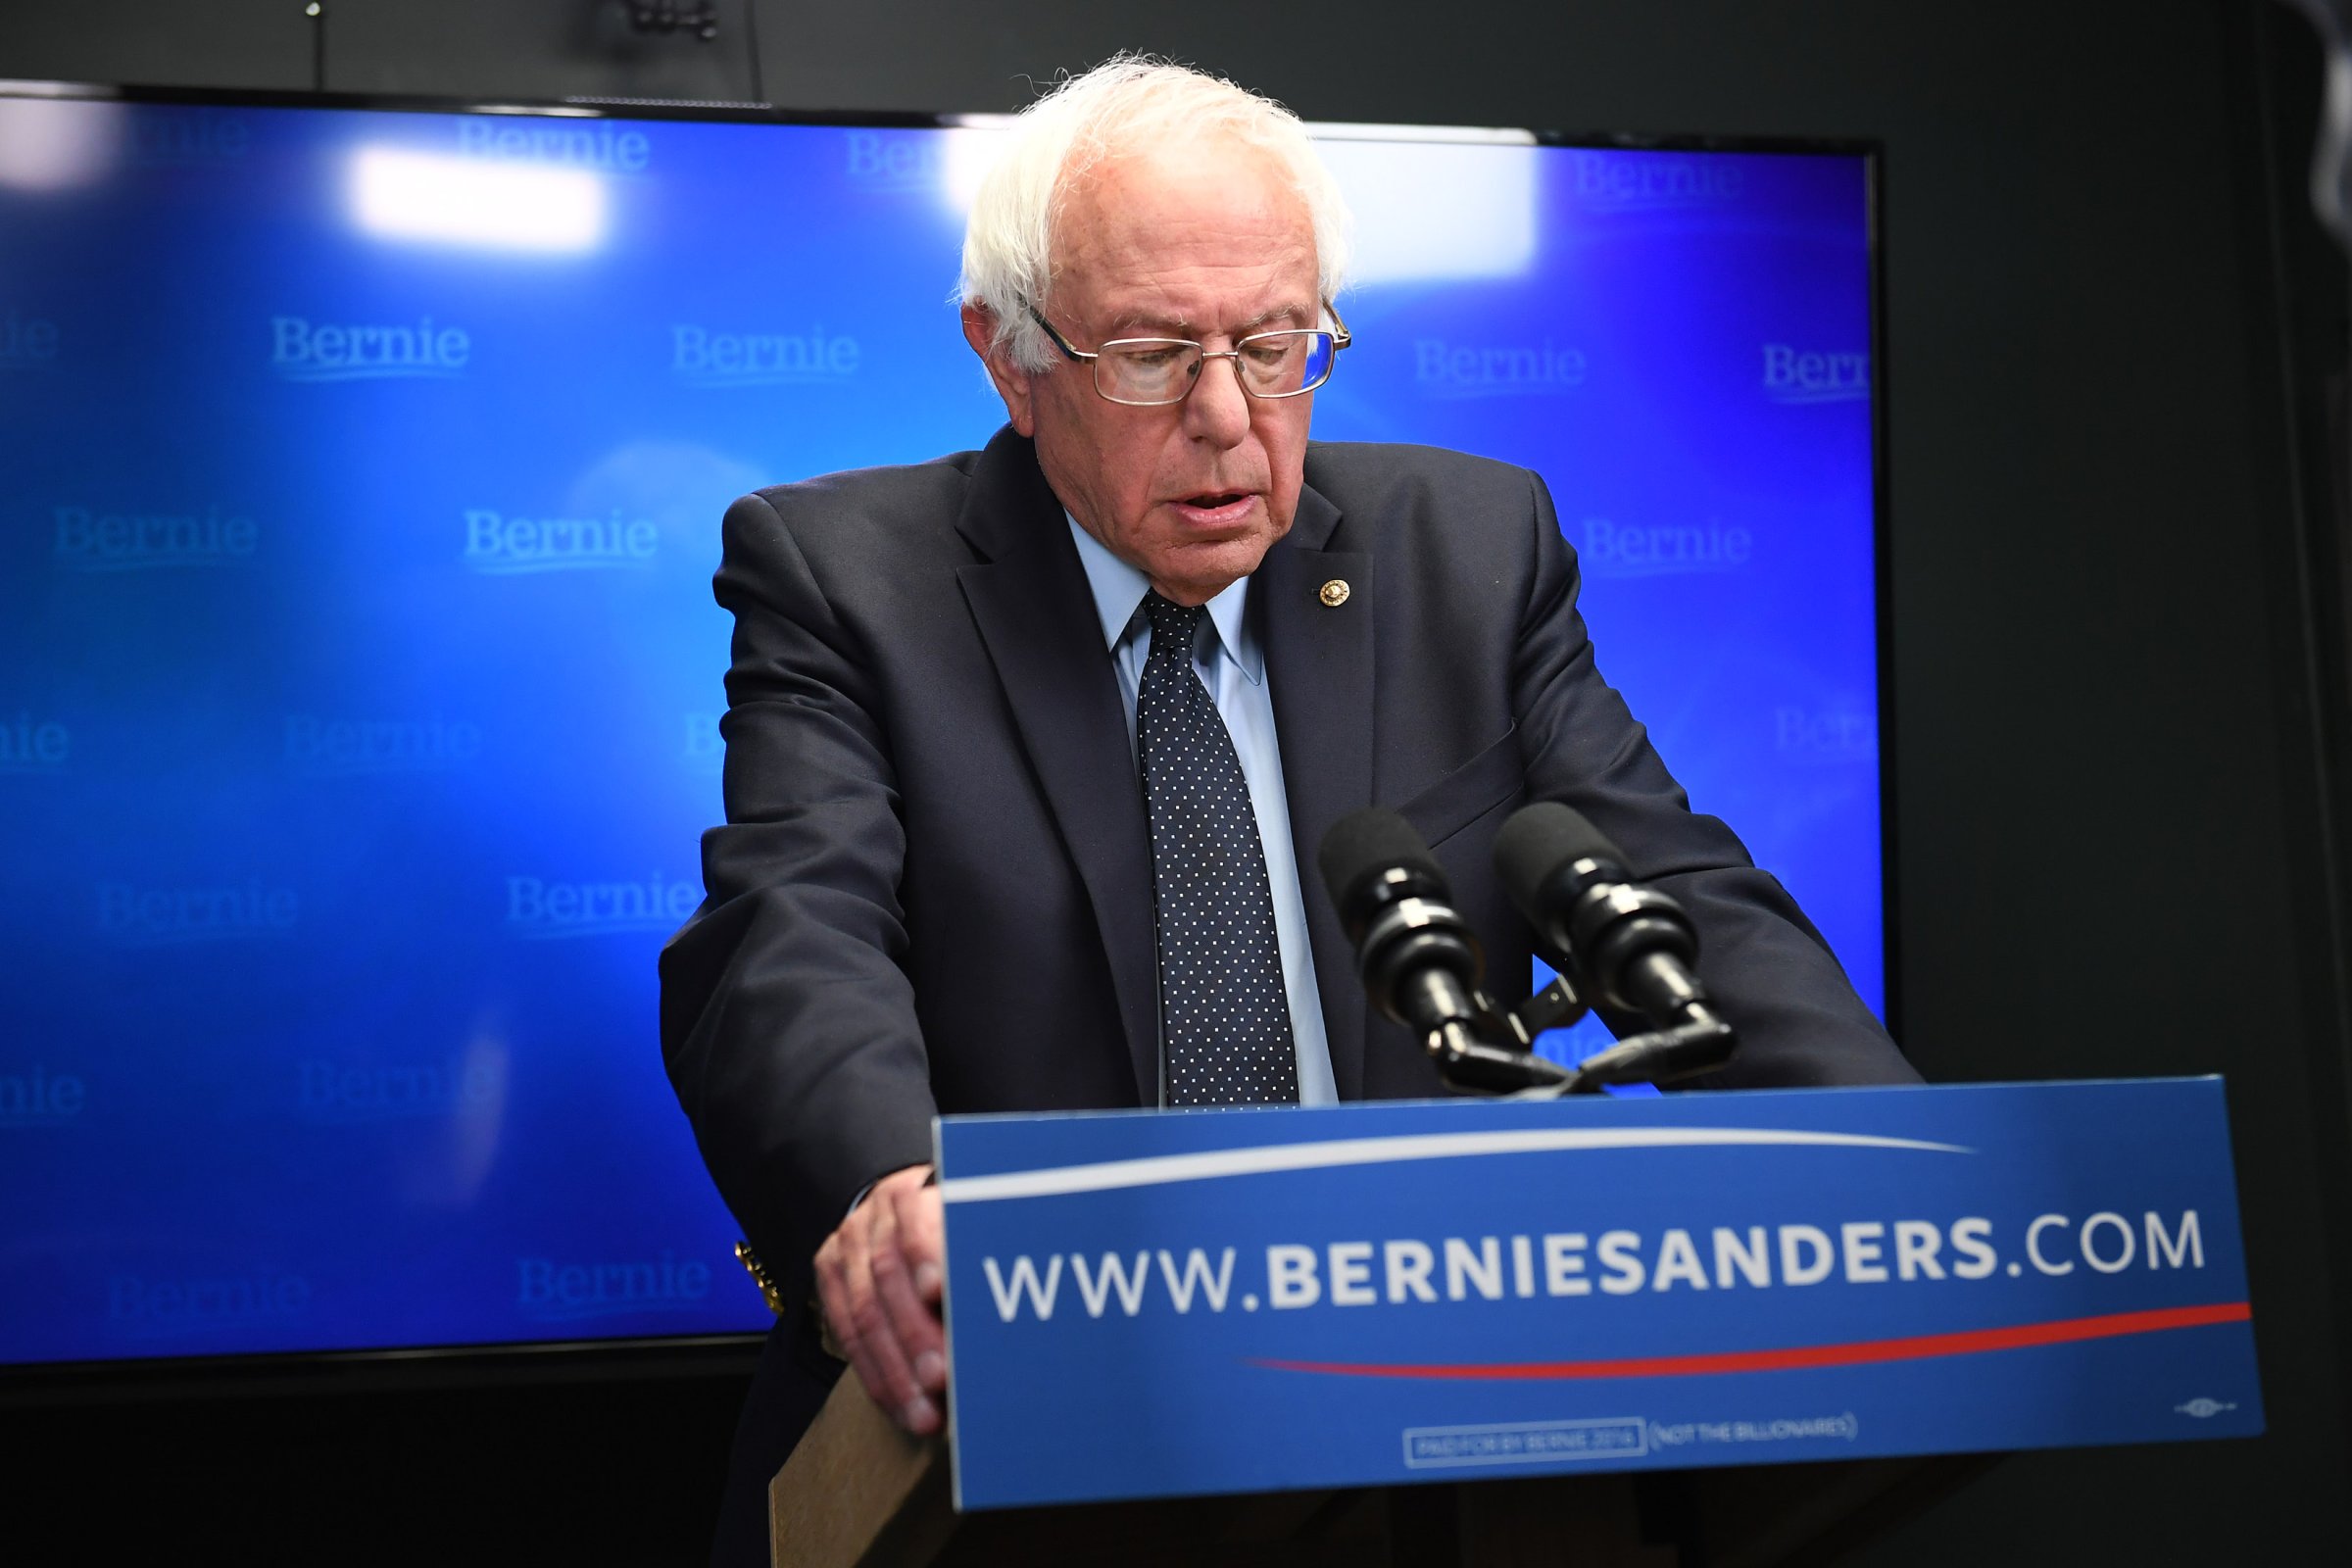 Presidential candidate Bernie Sanders prepares to speak for a video to supporters at Polaris Mediaworks in Burlington, Vt., on June 16, 2016.